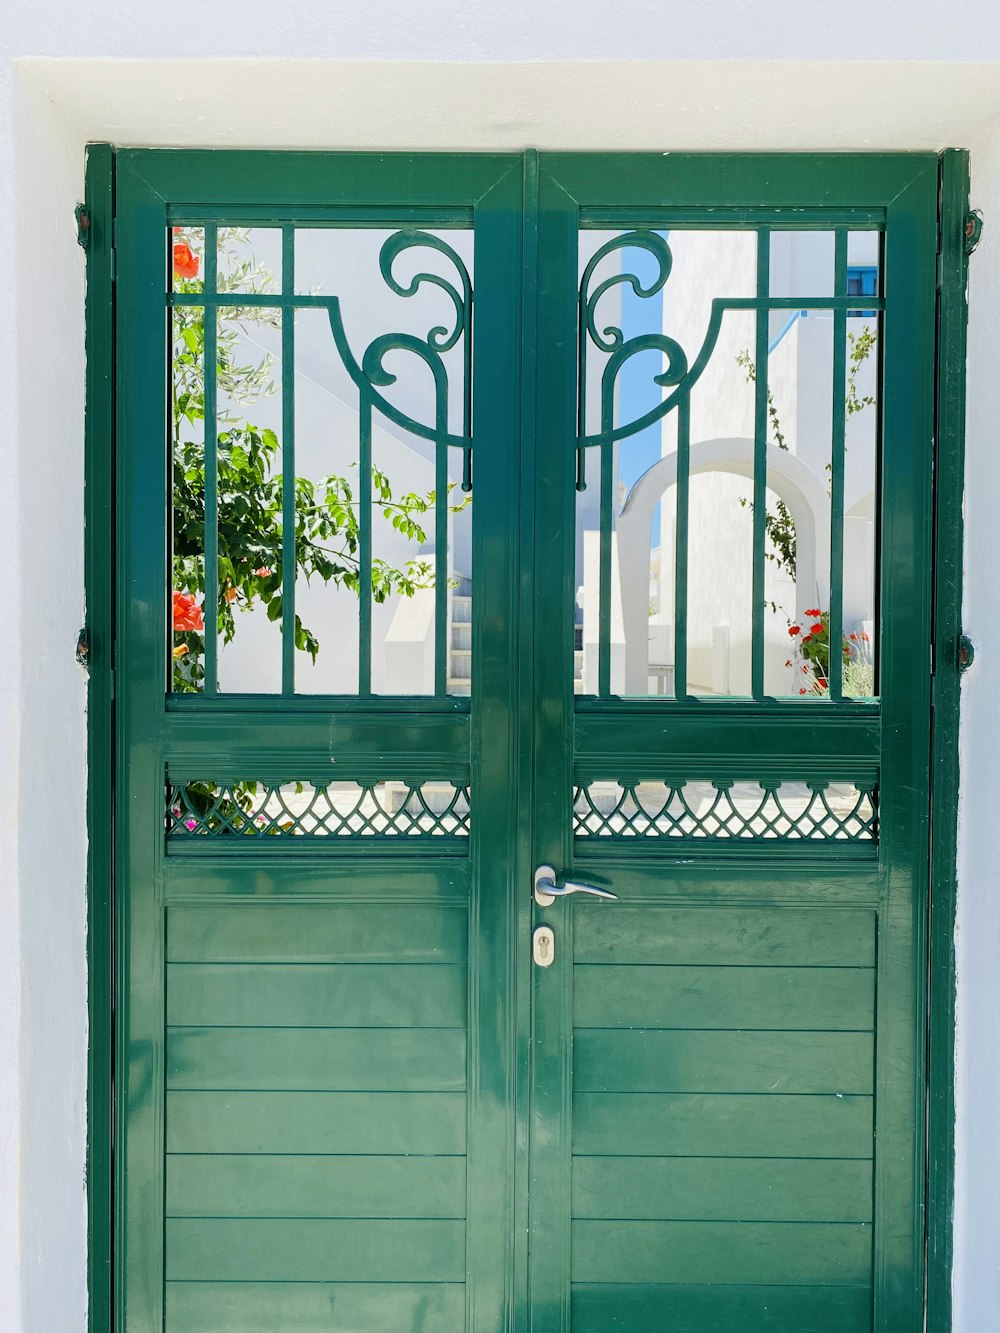 a pair of green doors with wrought iron